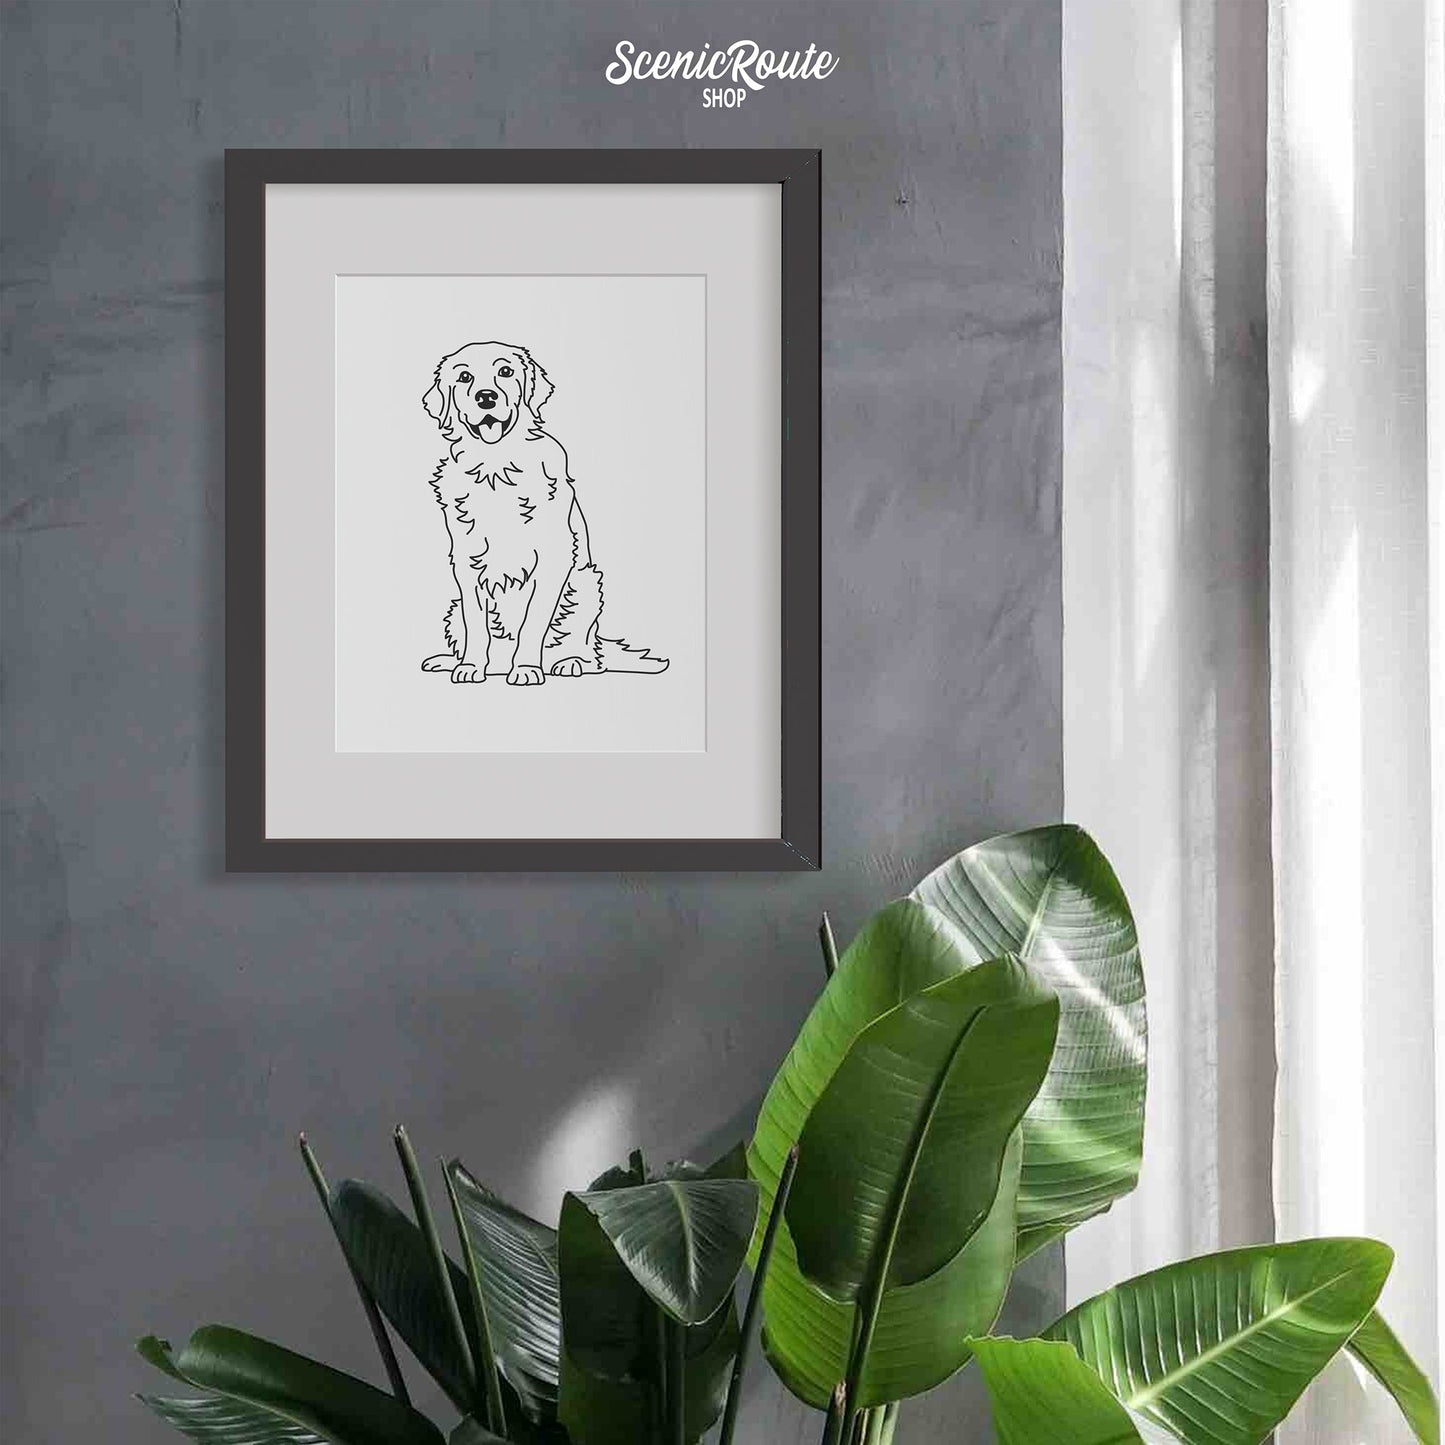 A framed line art drawing of a Golden Retriever dog on a gray wall with a plant below